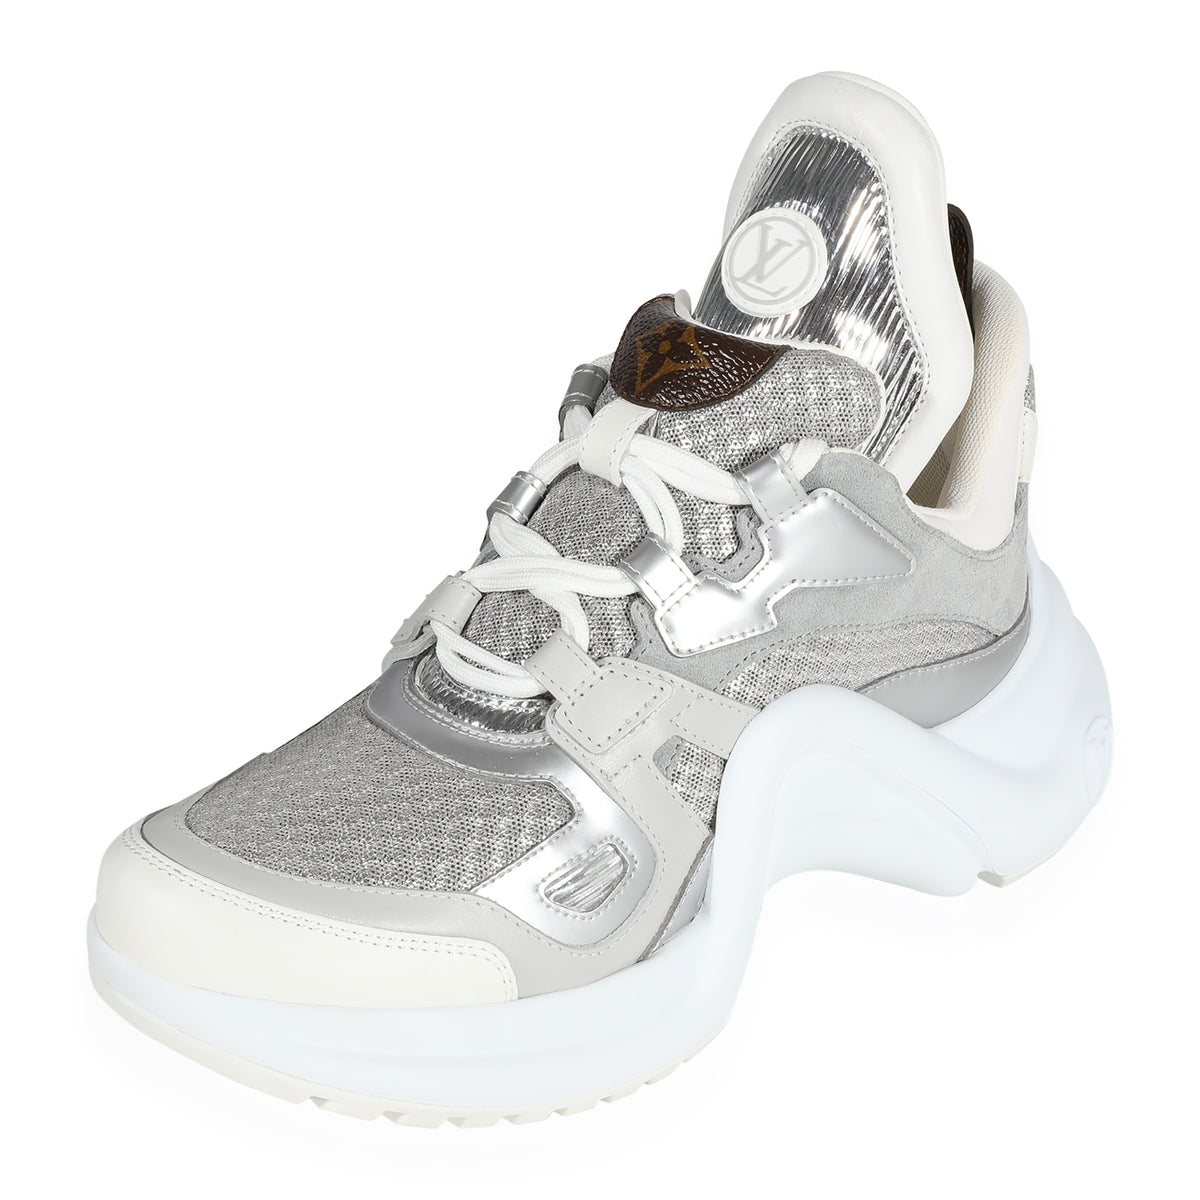 Louis Vuitton - Authenticated Archlight Trainer - Glitter White for Women, Very Good Condition